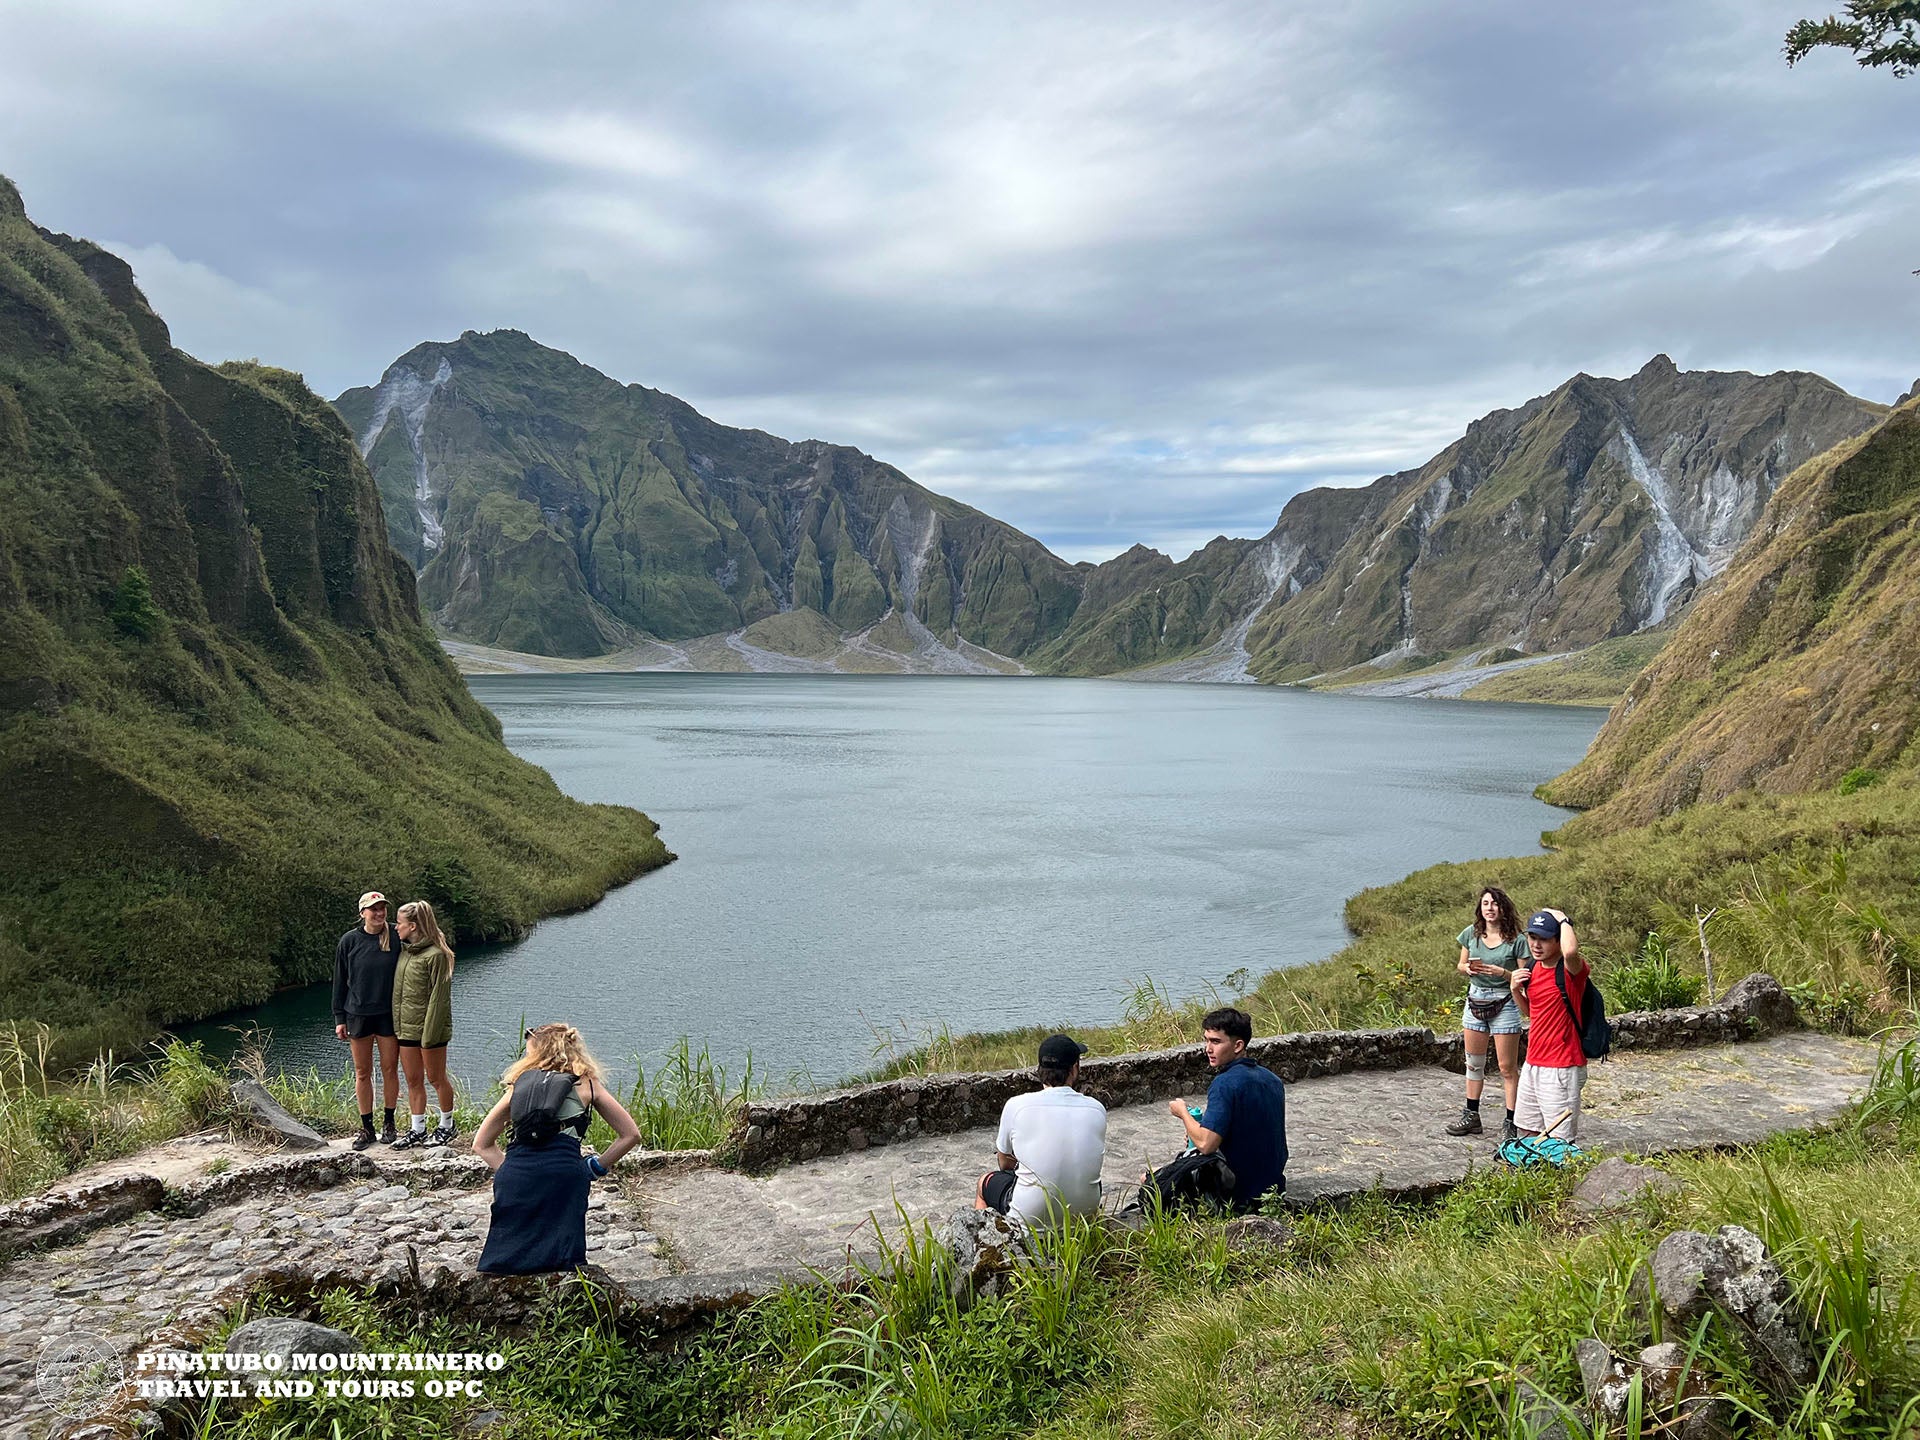 Tourists at Mt. Pinatubo rest station